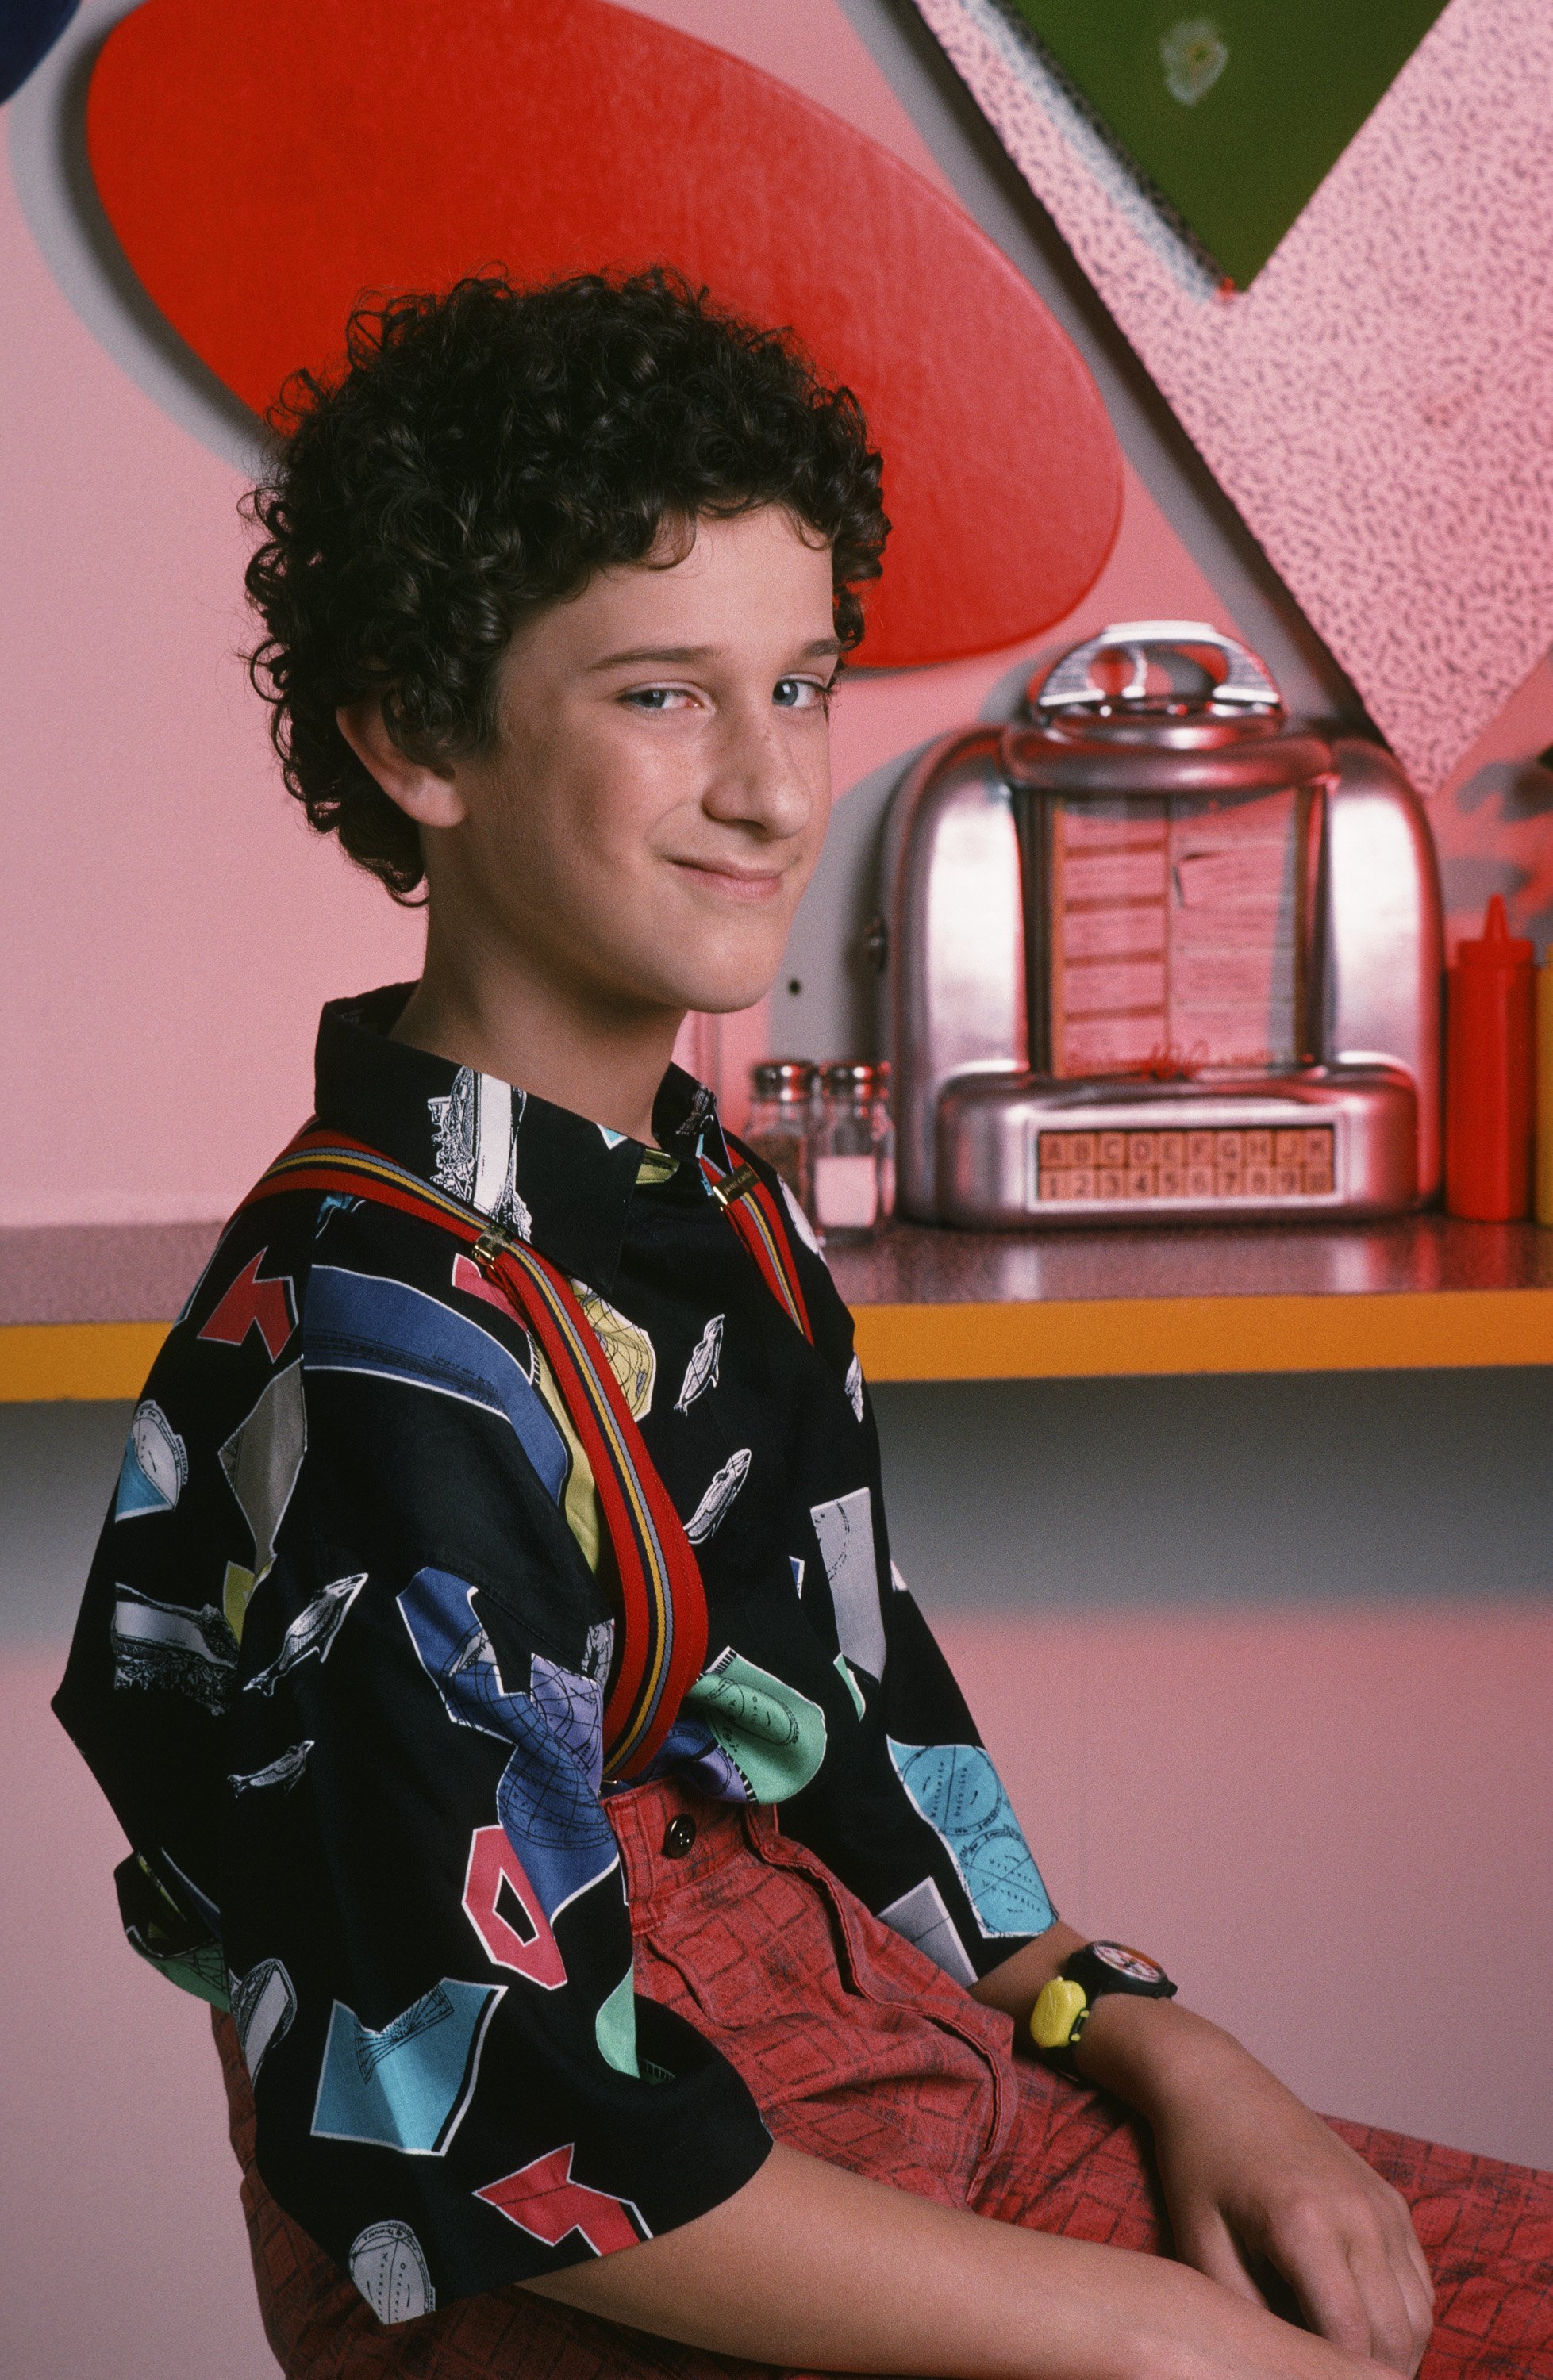 Saved By the Bell star Dustin Diamond